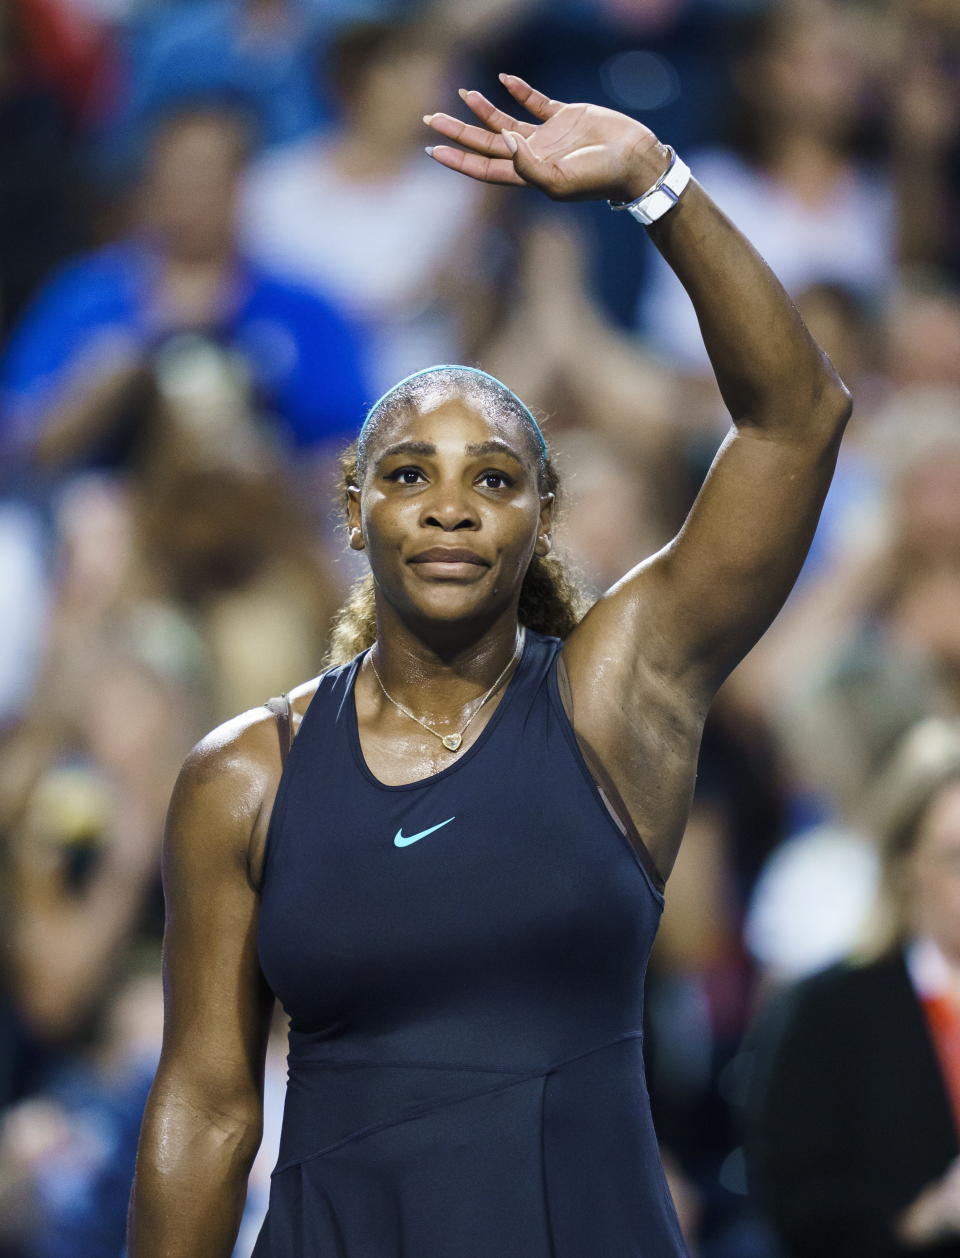 Serena Williams, of the United States, waves to the crowd after defeating Elise Mertens, of Belgium, during the Rogers Cup women’s tennis tournament Wednesday, Aug. 7, 2019, in Toronto. (Mark Blinch/The Canadian Press via AP)